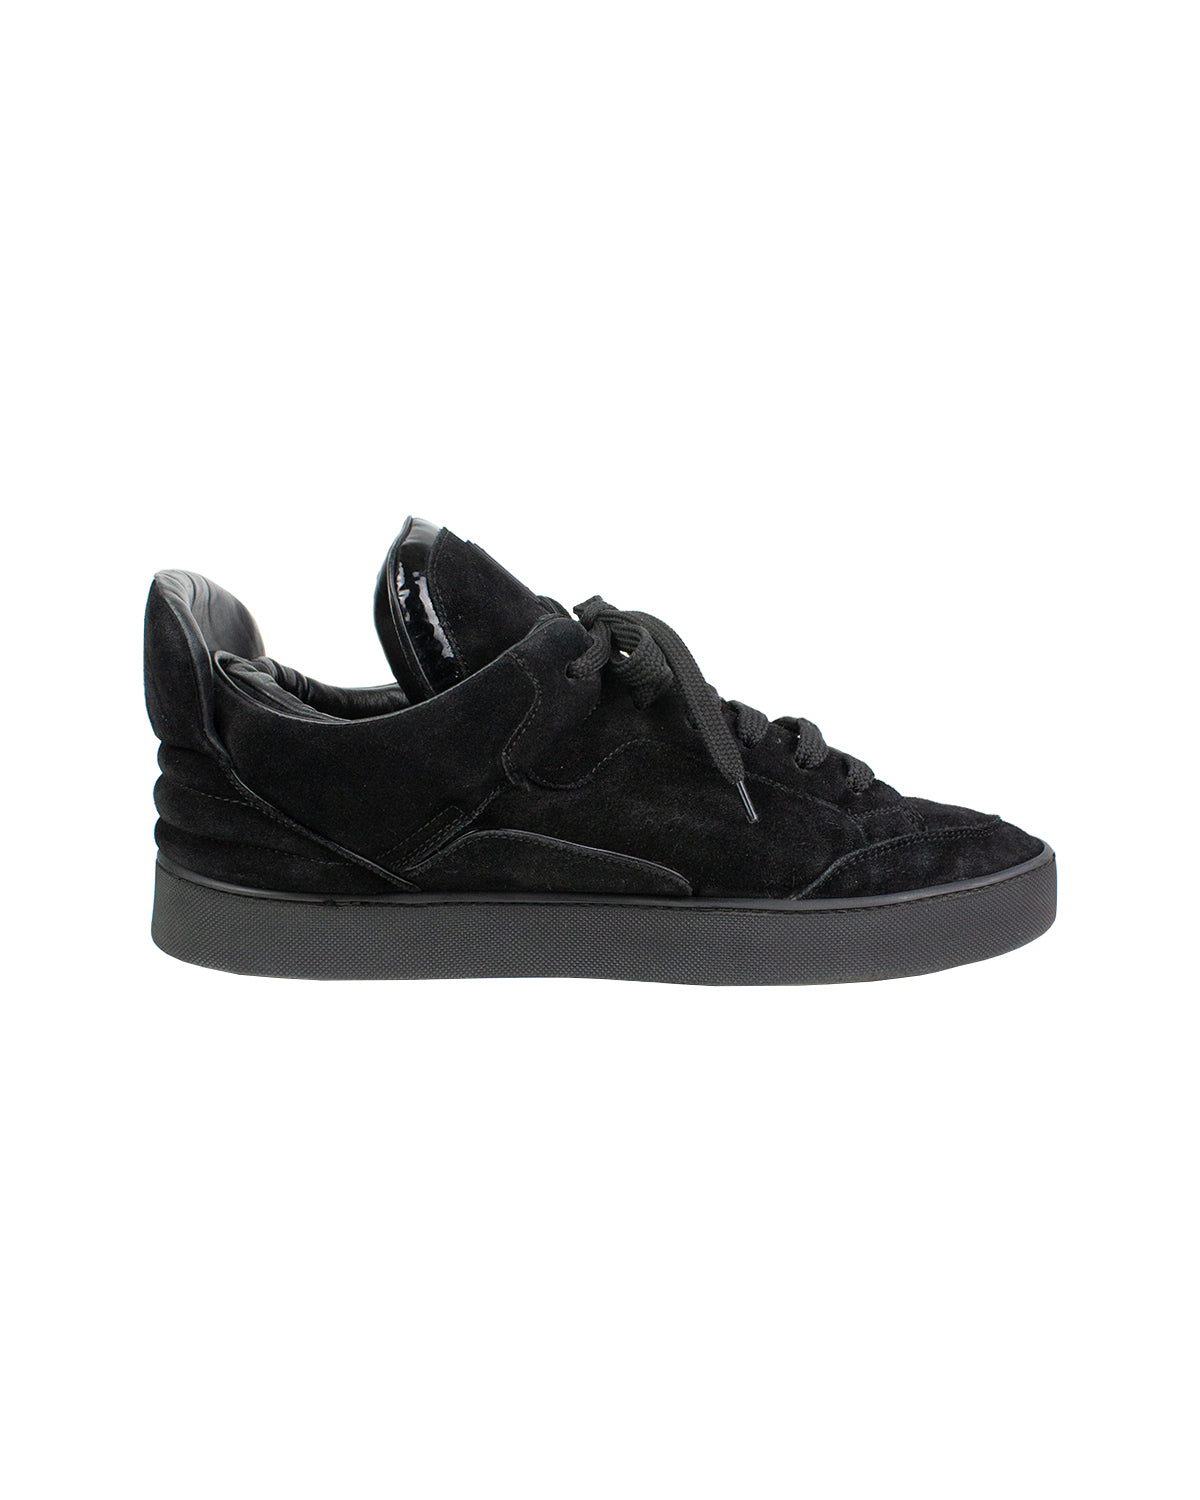 2009 Louis Vuitton x Kanye West Anthracite Dons Sneakers LV